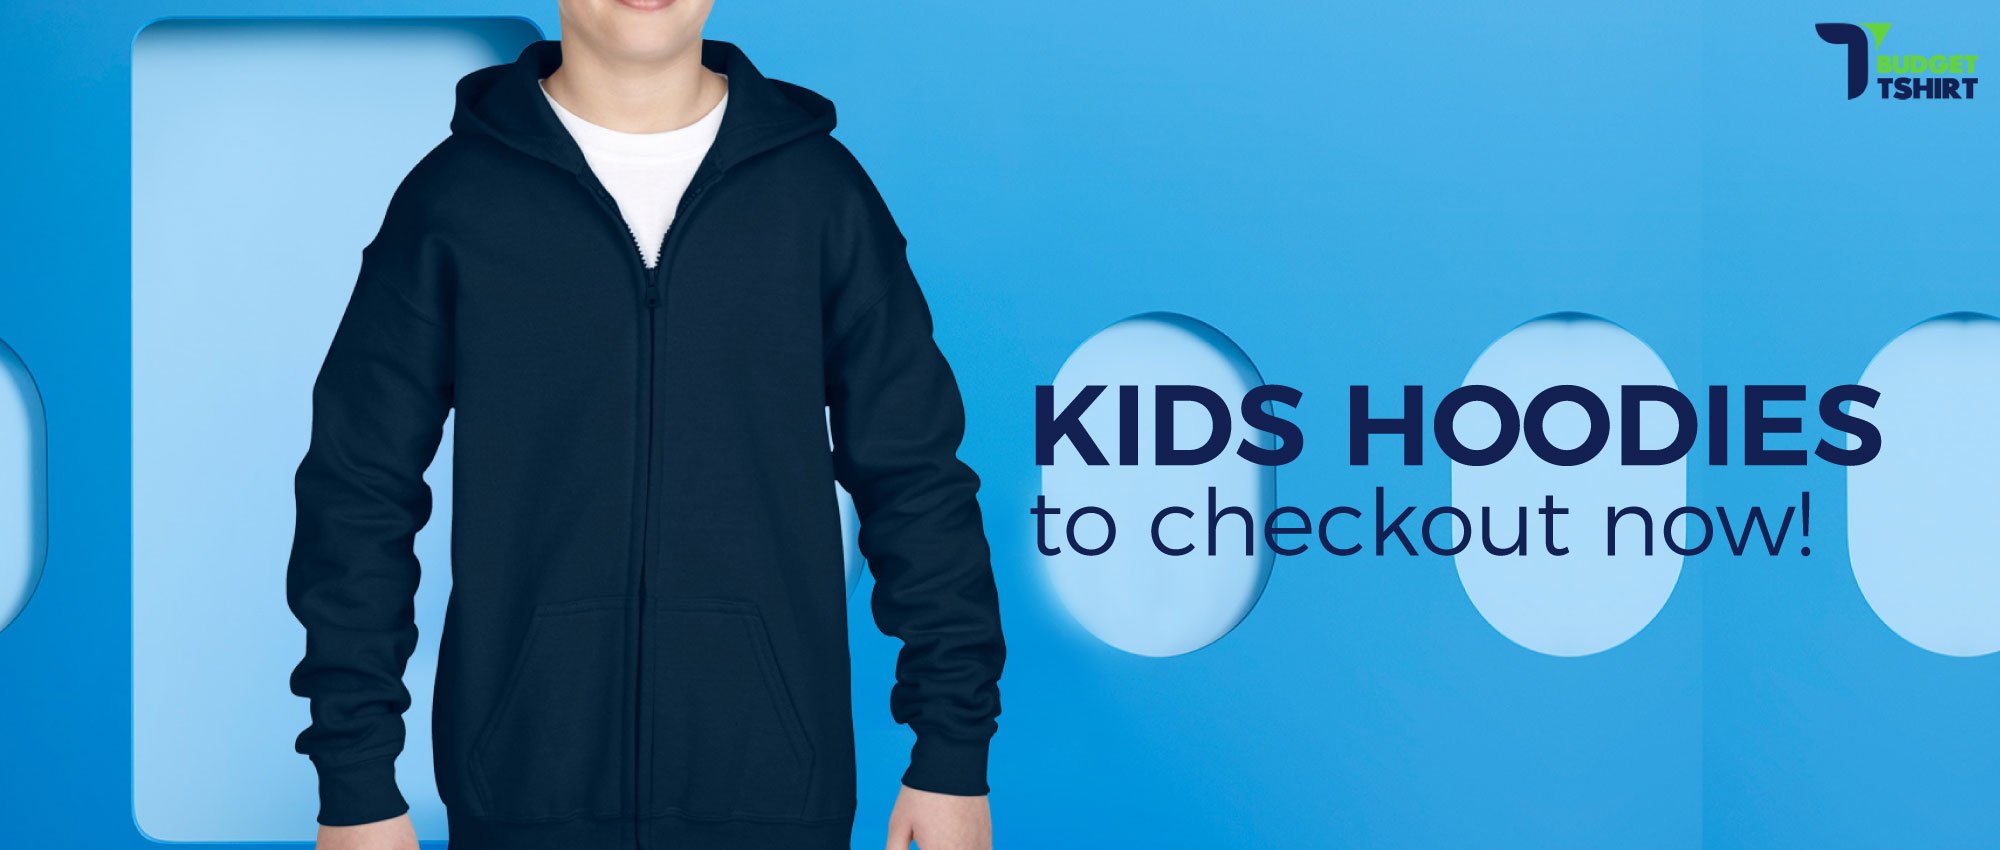 Kids hoodies to checkout now!